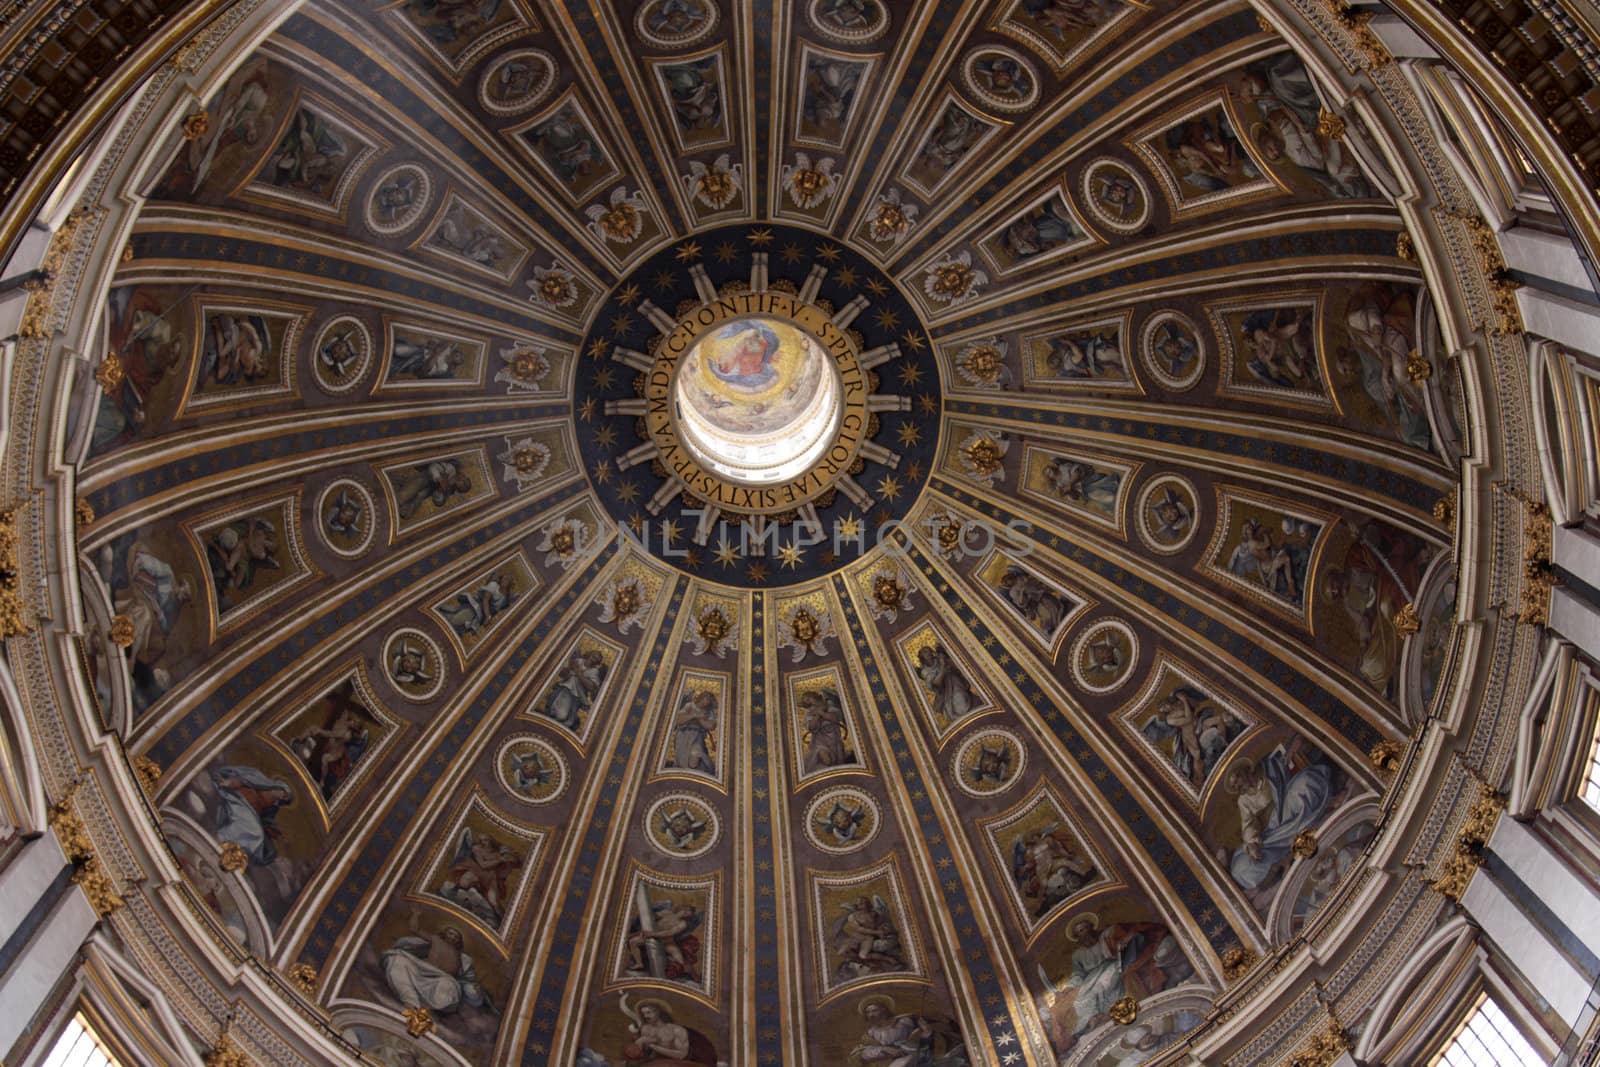 The inside of the dome of St. Peter's Basilica in the Vatican, Rome, Italy. 